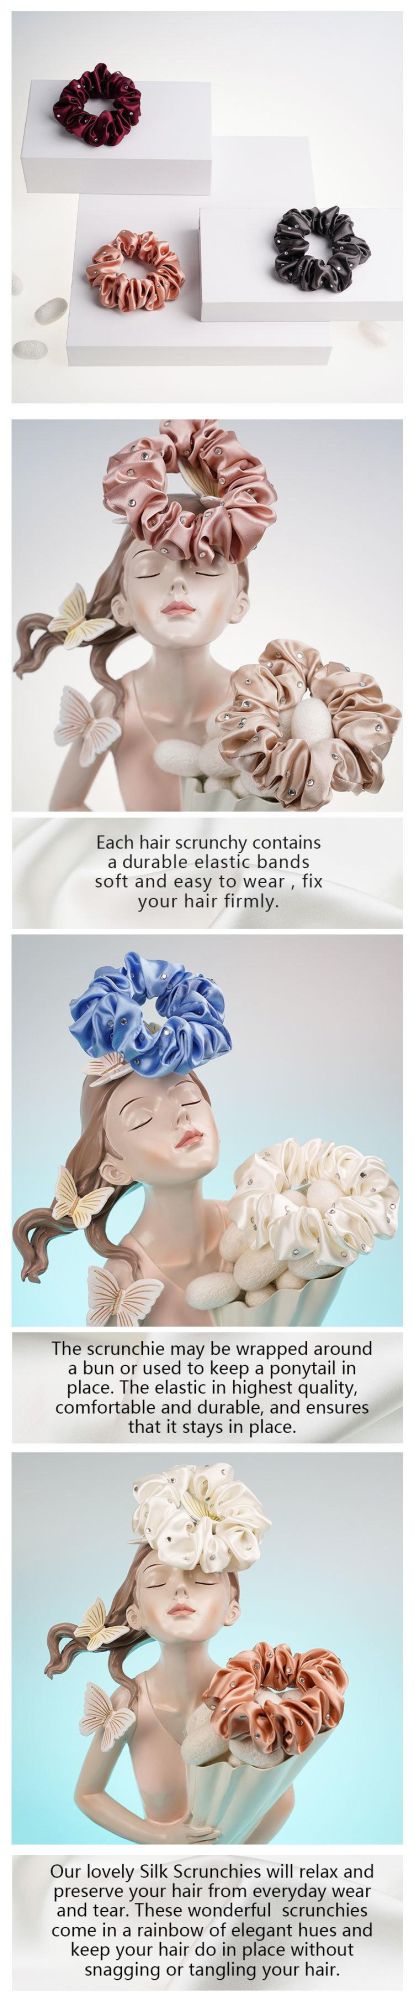 Crystal Mulberry Silk Scrunchies for 3.5cm in New Fashionable Style